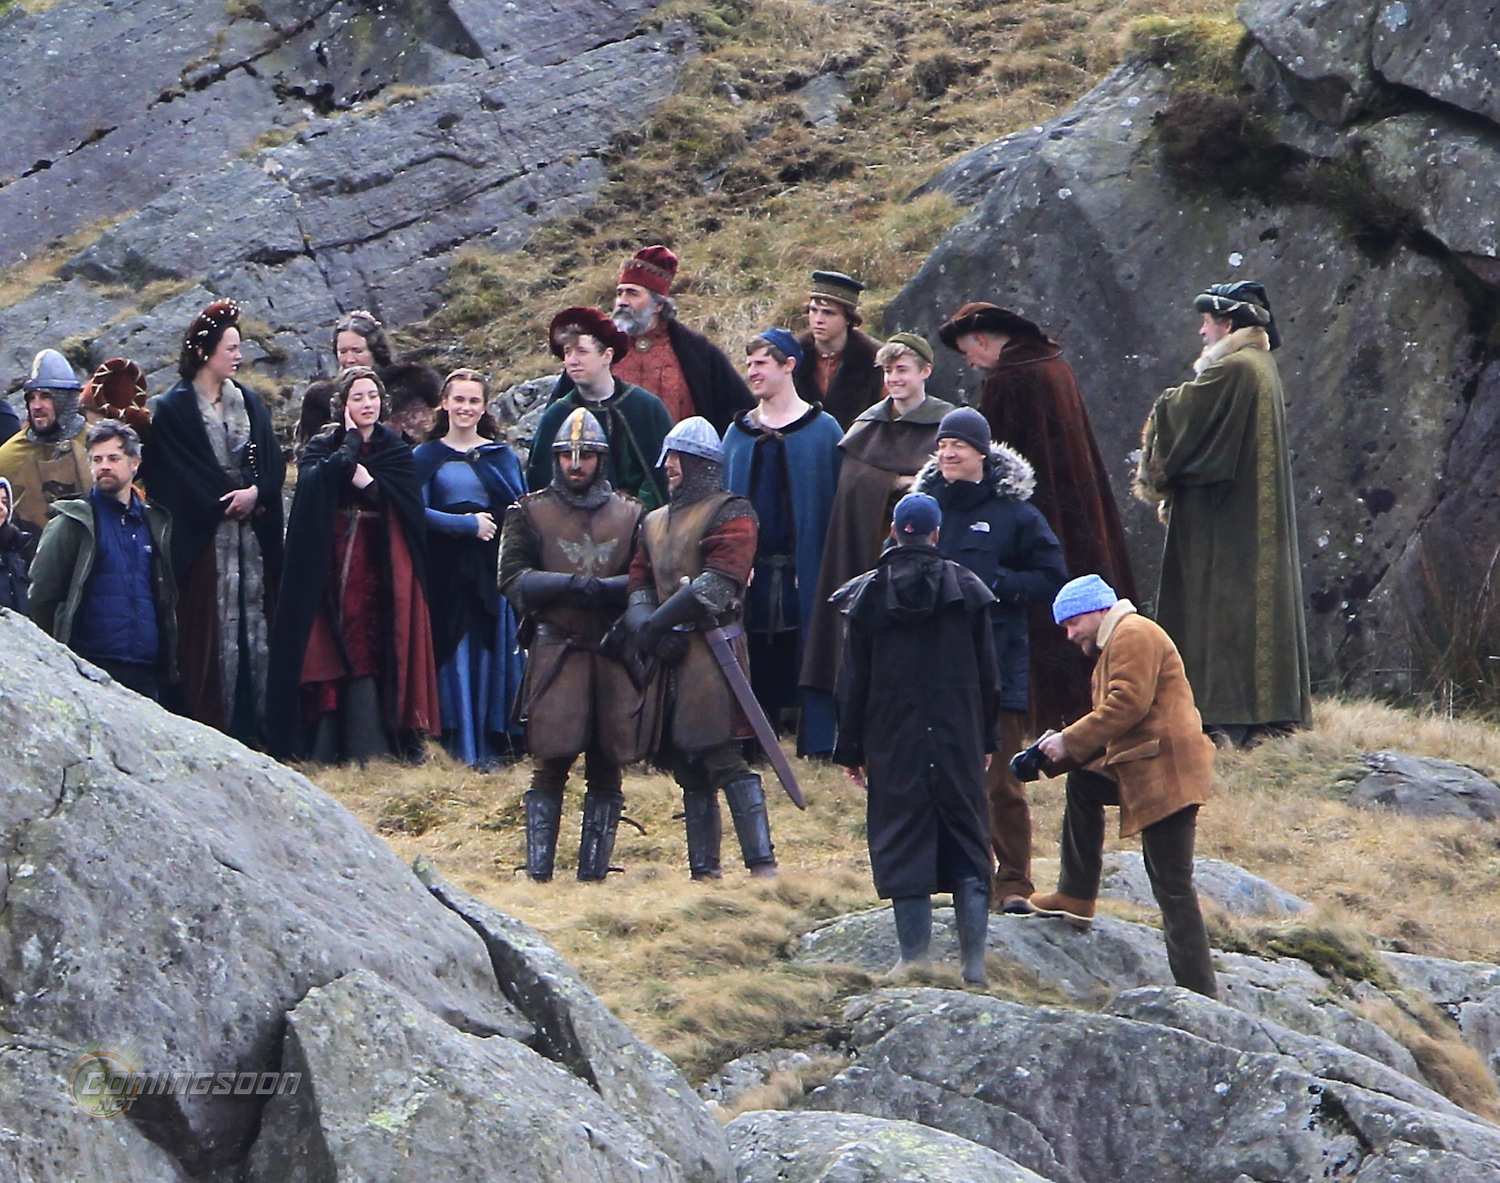 'Knights of the Roundtable: King Arthur' filming in Wales

Featuring: Guy Ritchie
Where: Conwy, United Kingdom
When: 14 Apr 2015
Credit: WENN.com